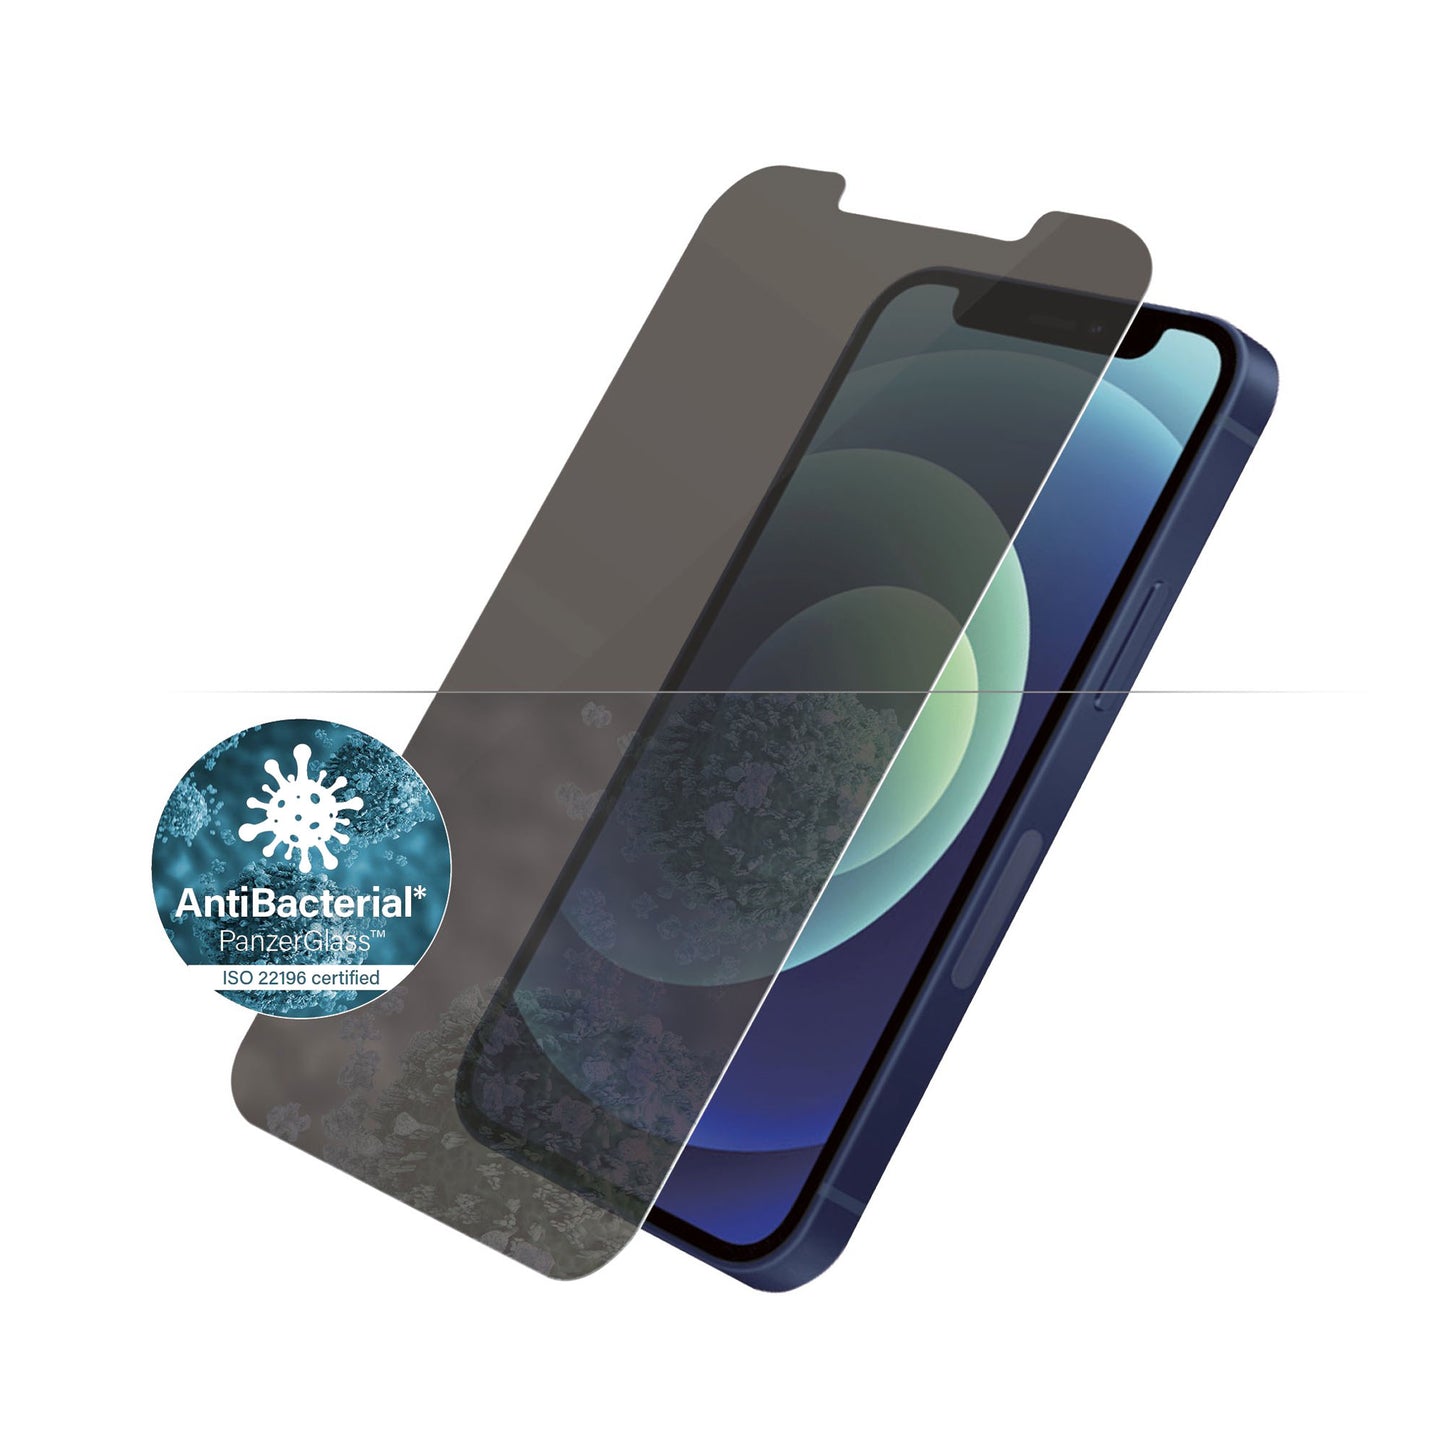 PANZERGLASS Standard Fit for iPhone 12 mini - Privacy